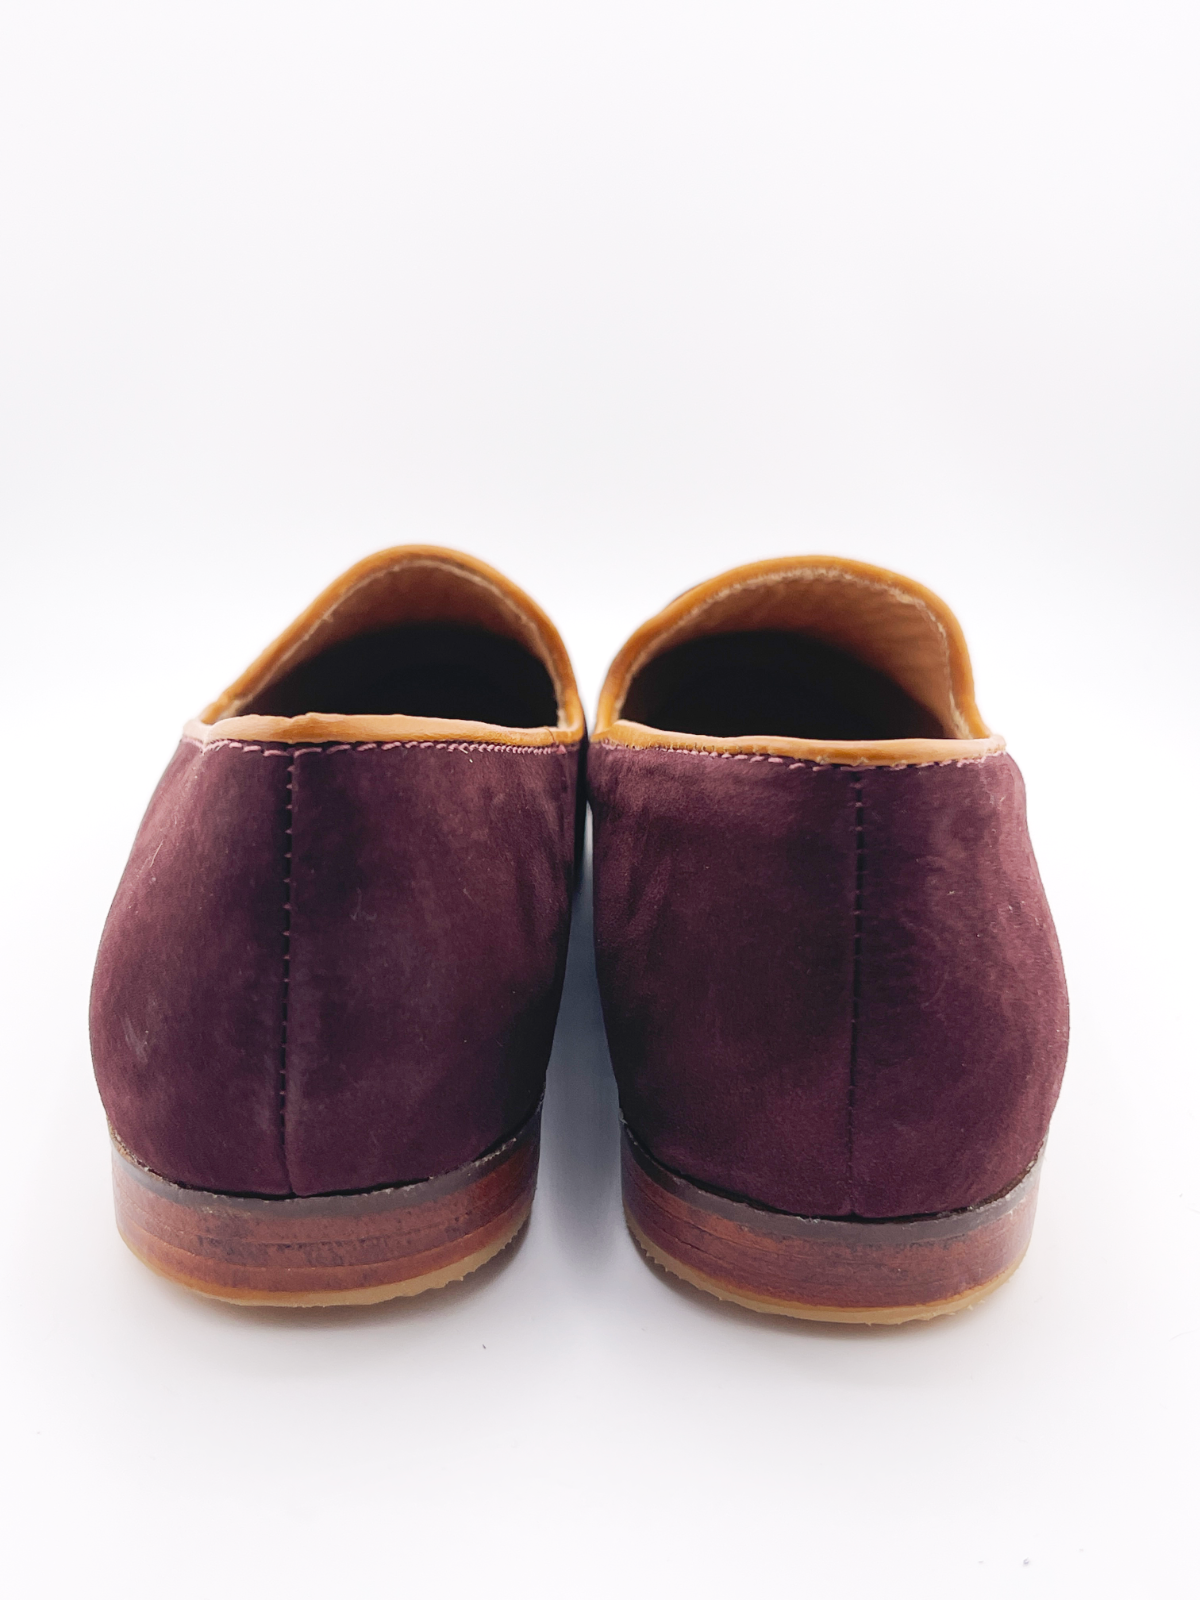 Millie Flat in Wine Nubuck with Camel Leather (PREORDER)